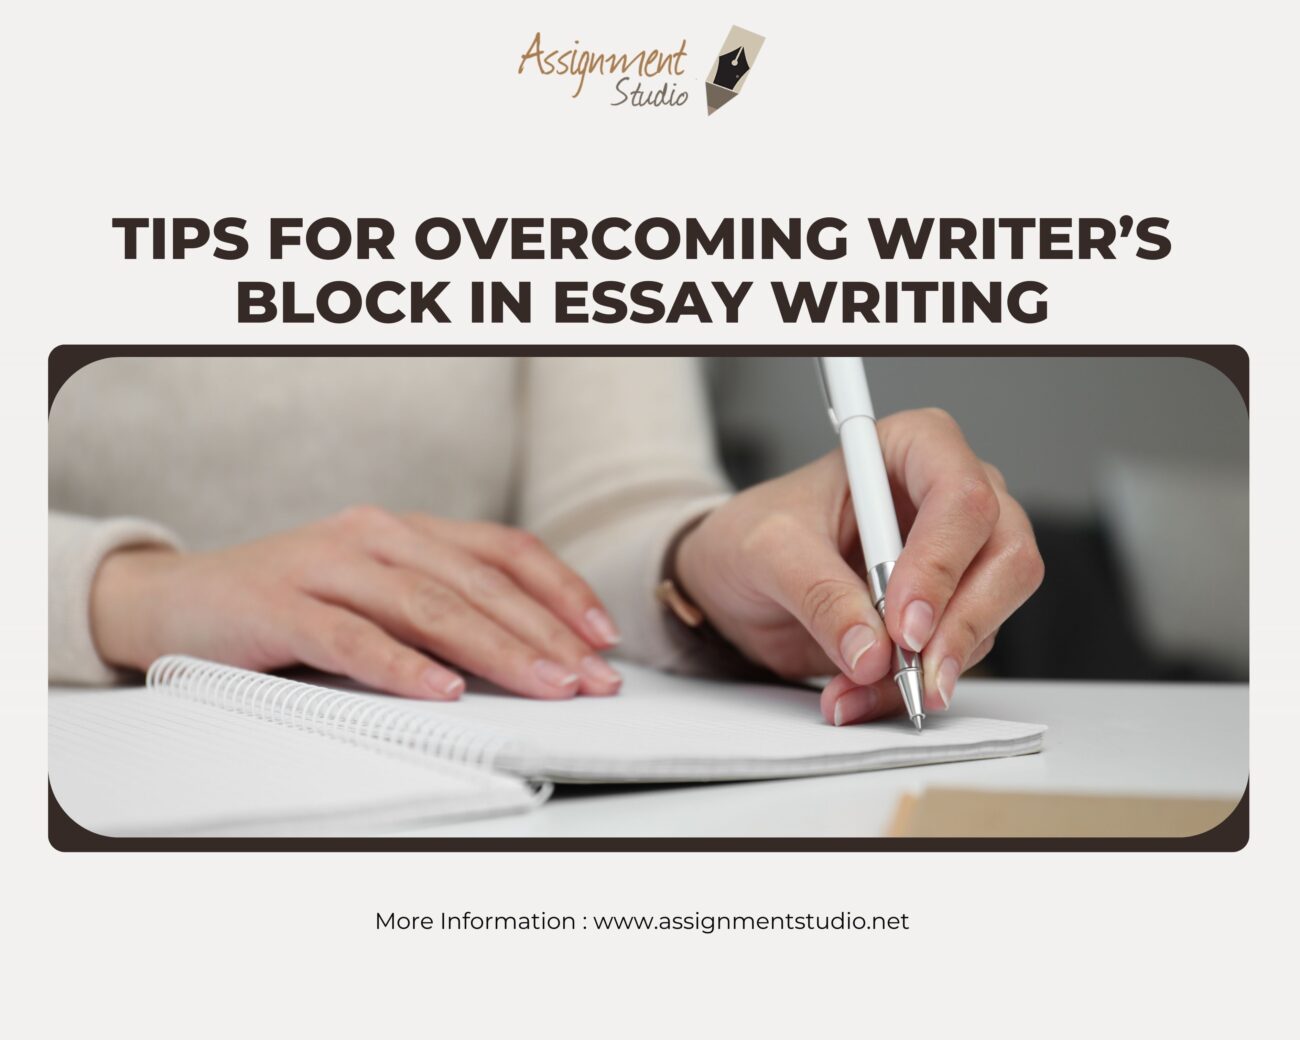 Tips for Overcoming Writer’s Block in Essay Writing